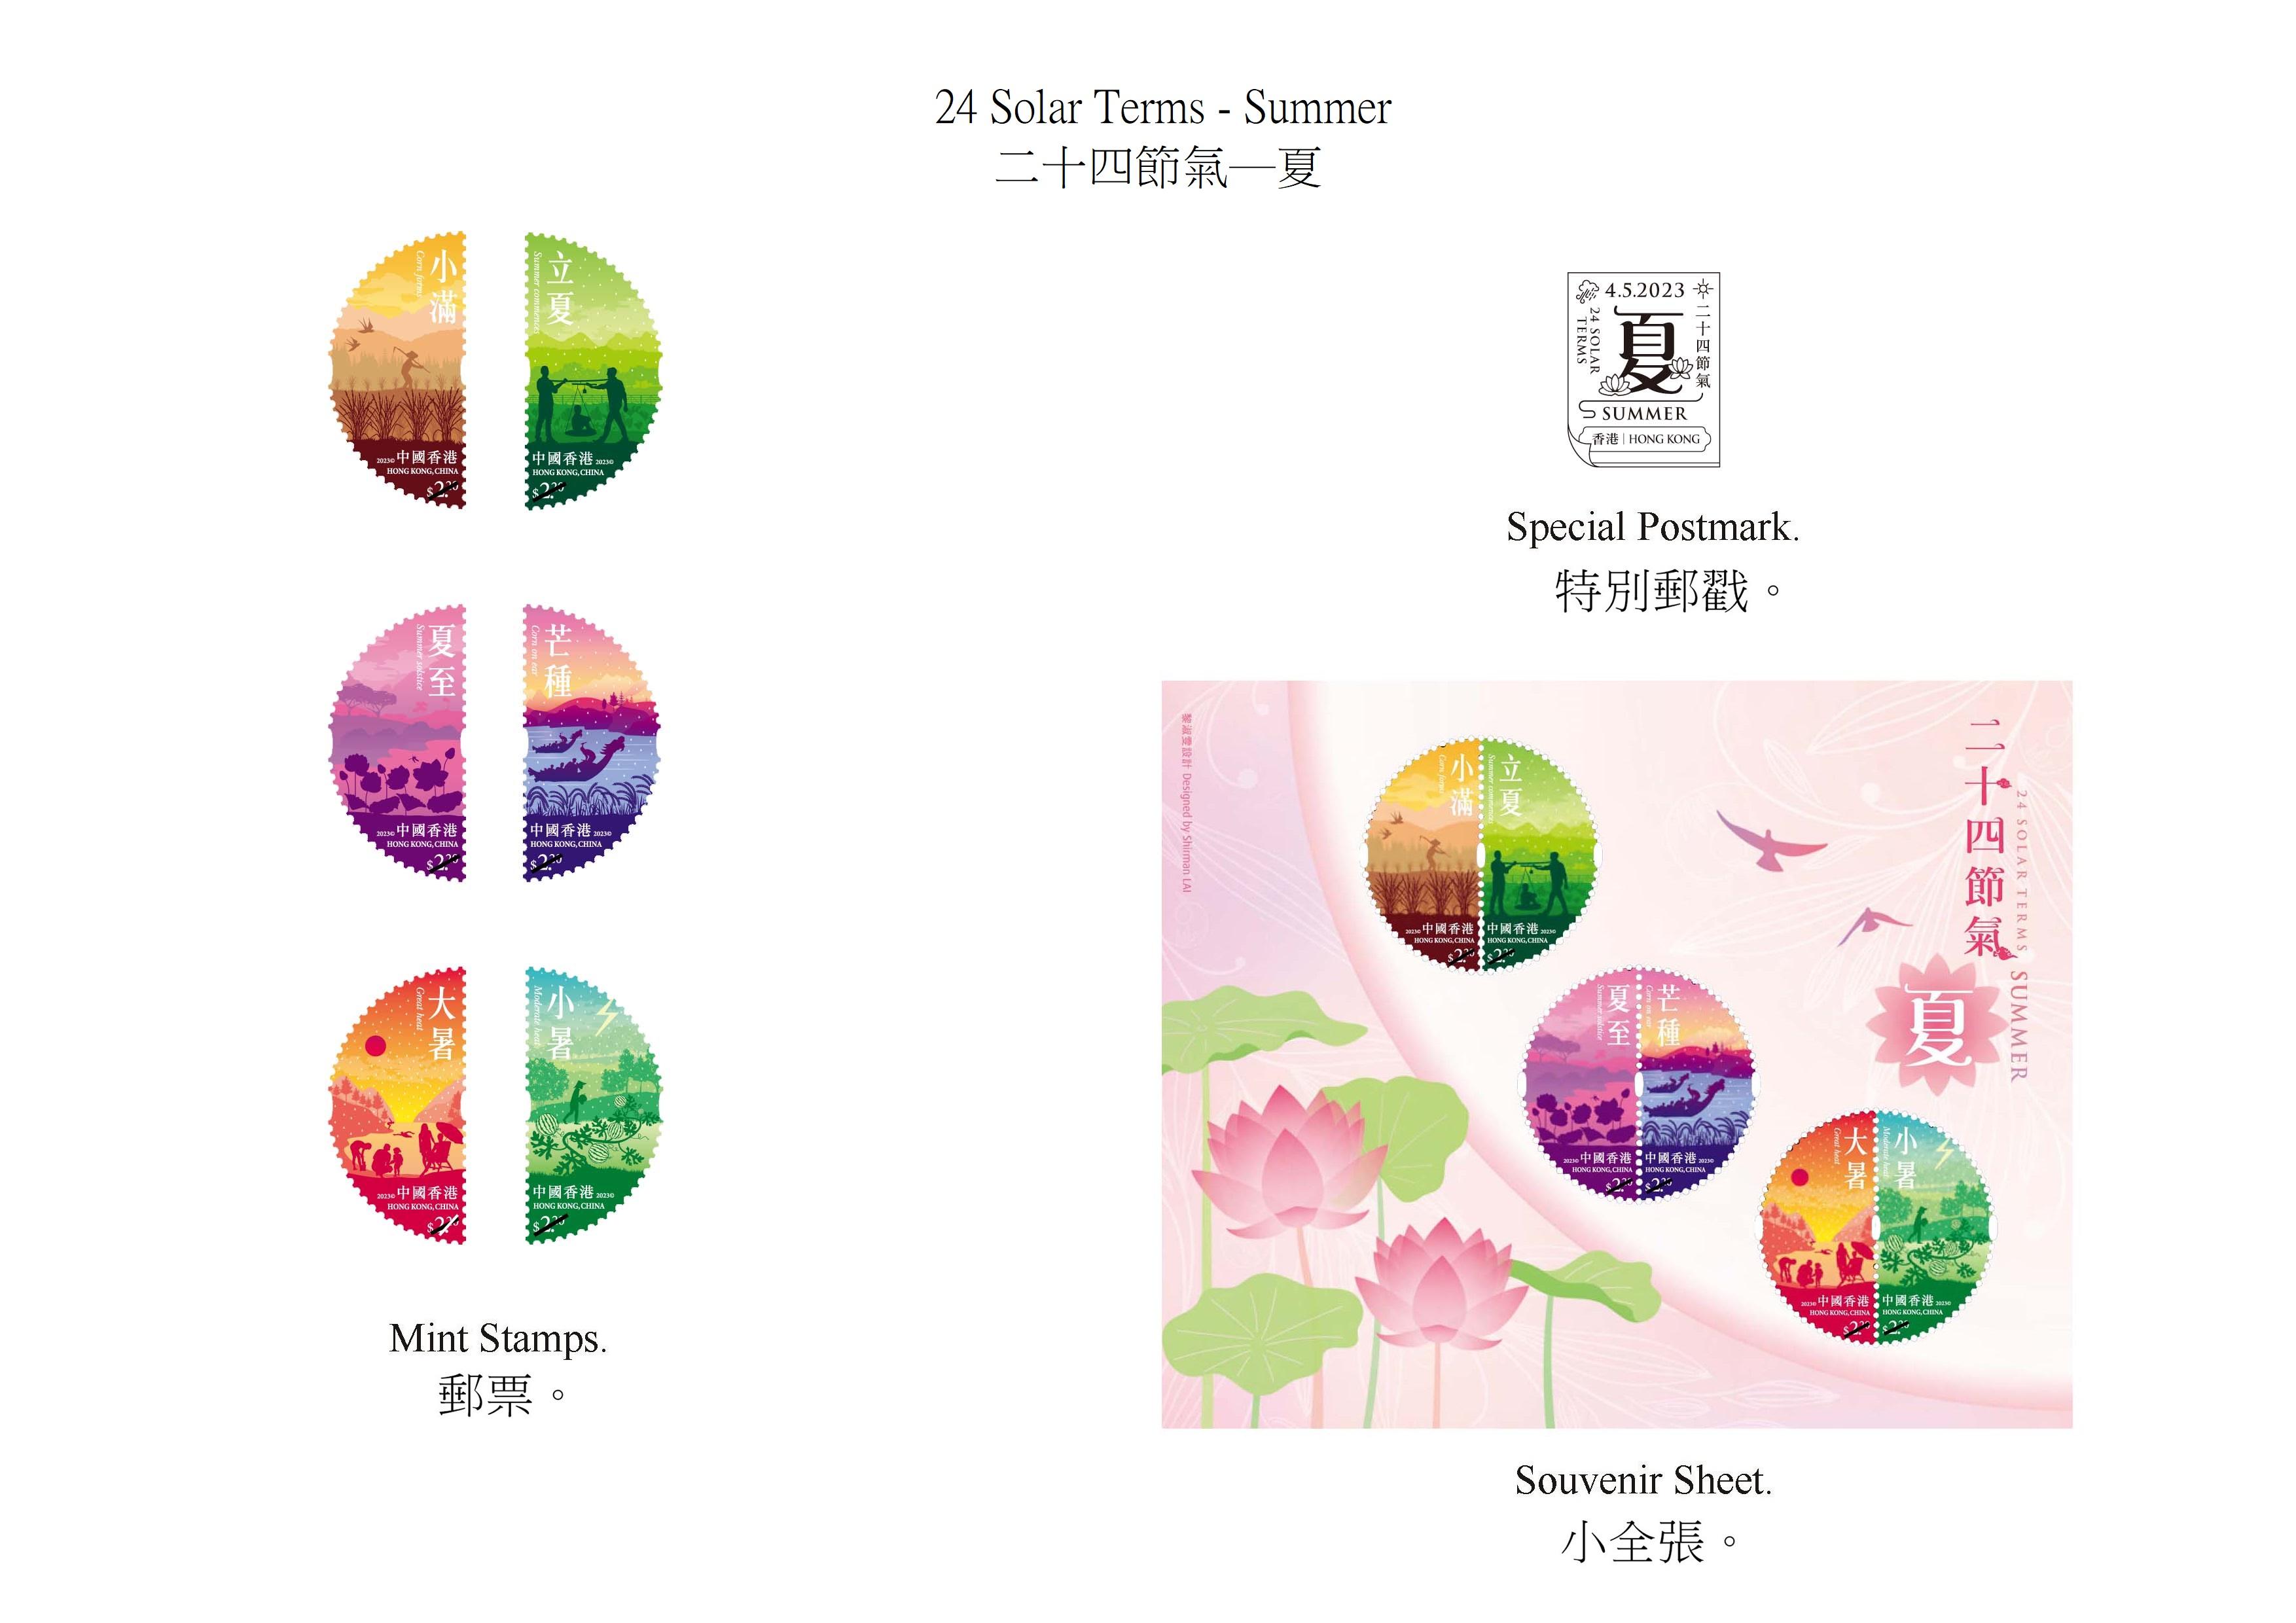 Hongkong Post will launch a special stamp issue and associated philatelic products on the theme of "24 Solar Terms - Summer" on May 4 (Thursday). Photo shows the mint stamps, the souvenir sheet and the special postmark.


